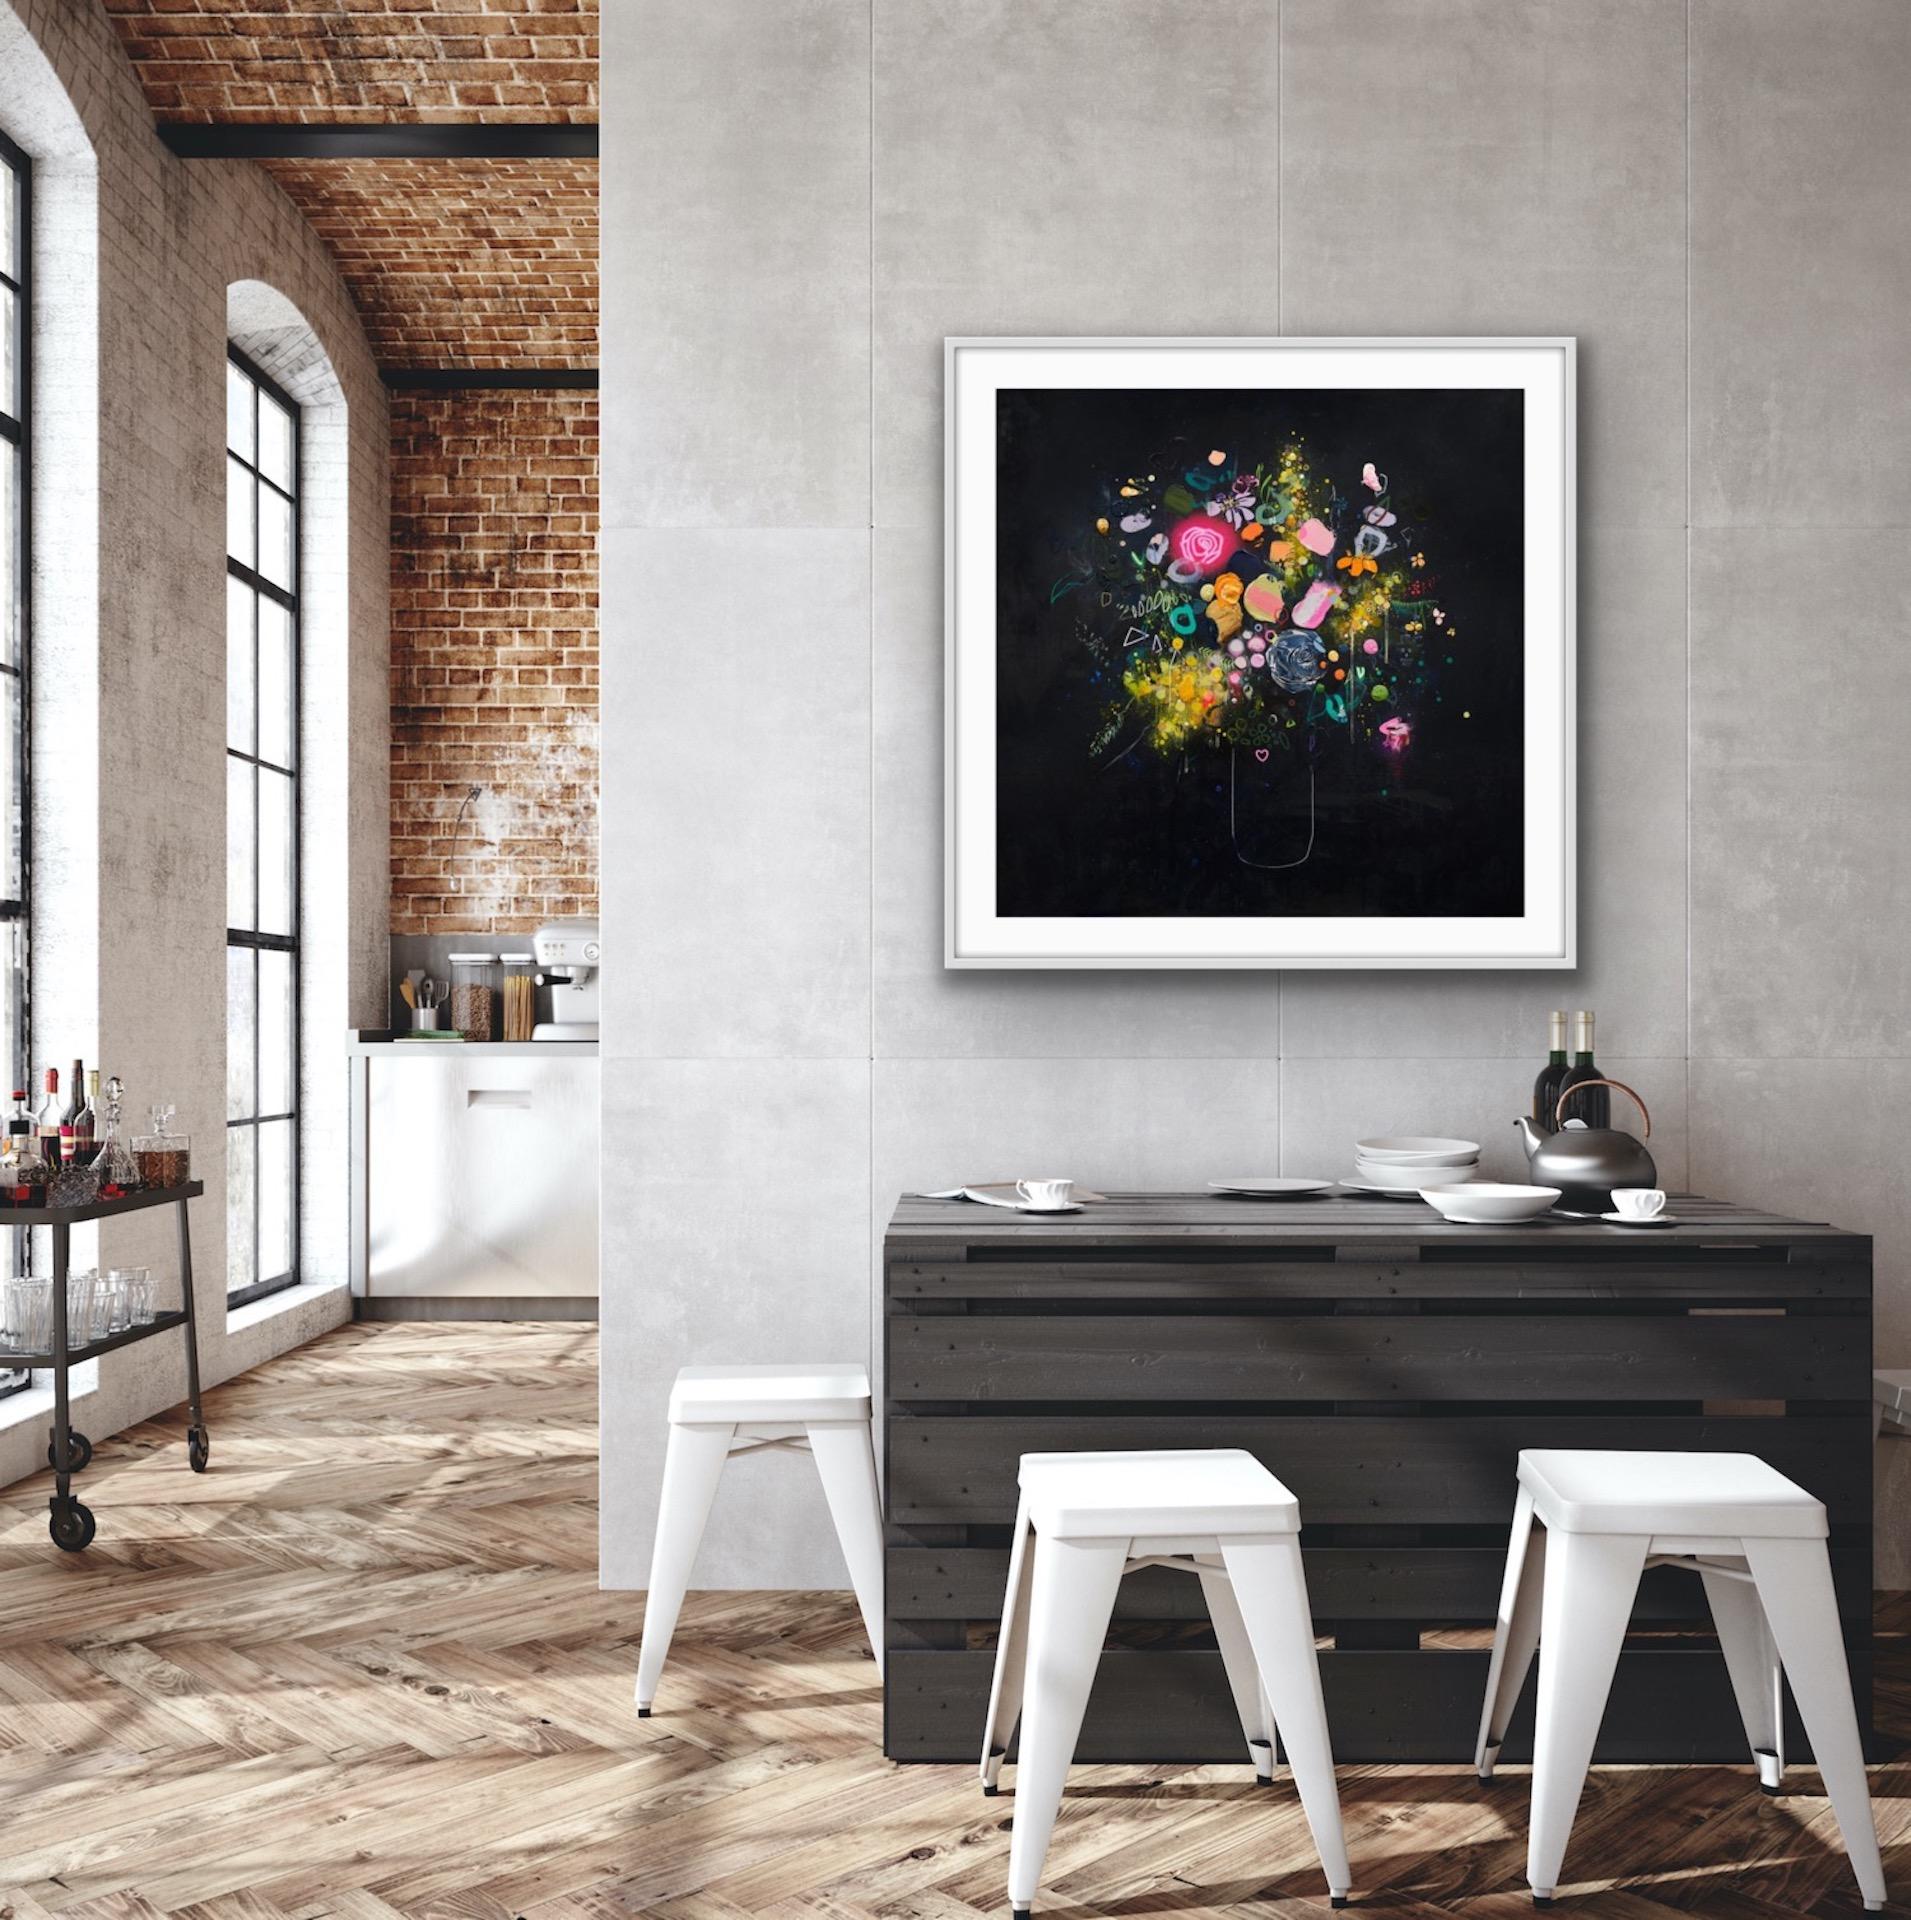 Lee Herring, Glowing Rose, Contemporary Art, Limited Edition Print 4